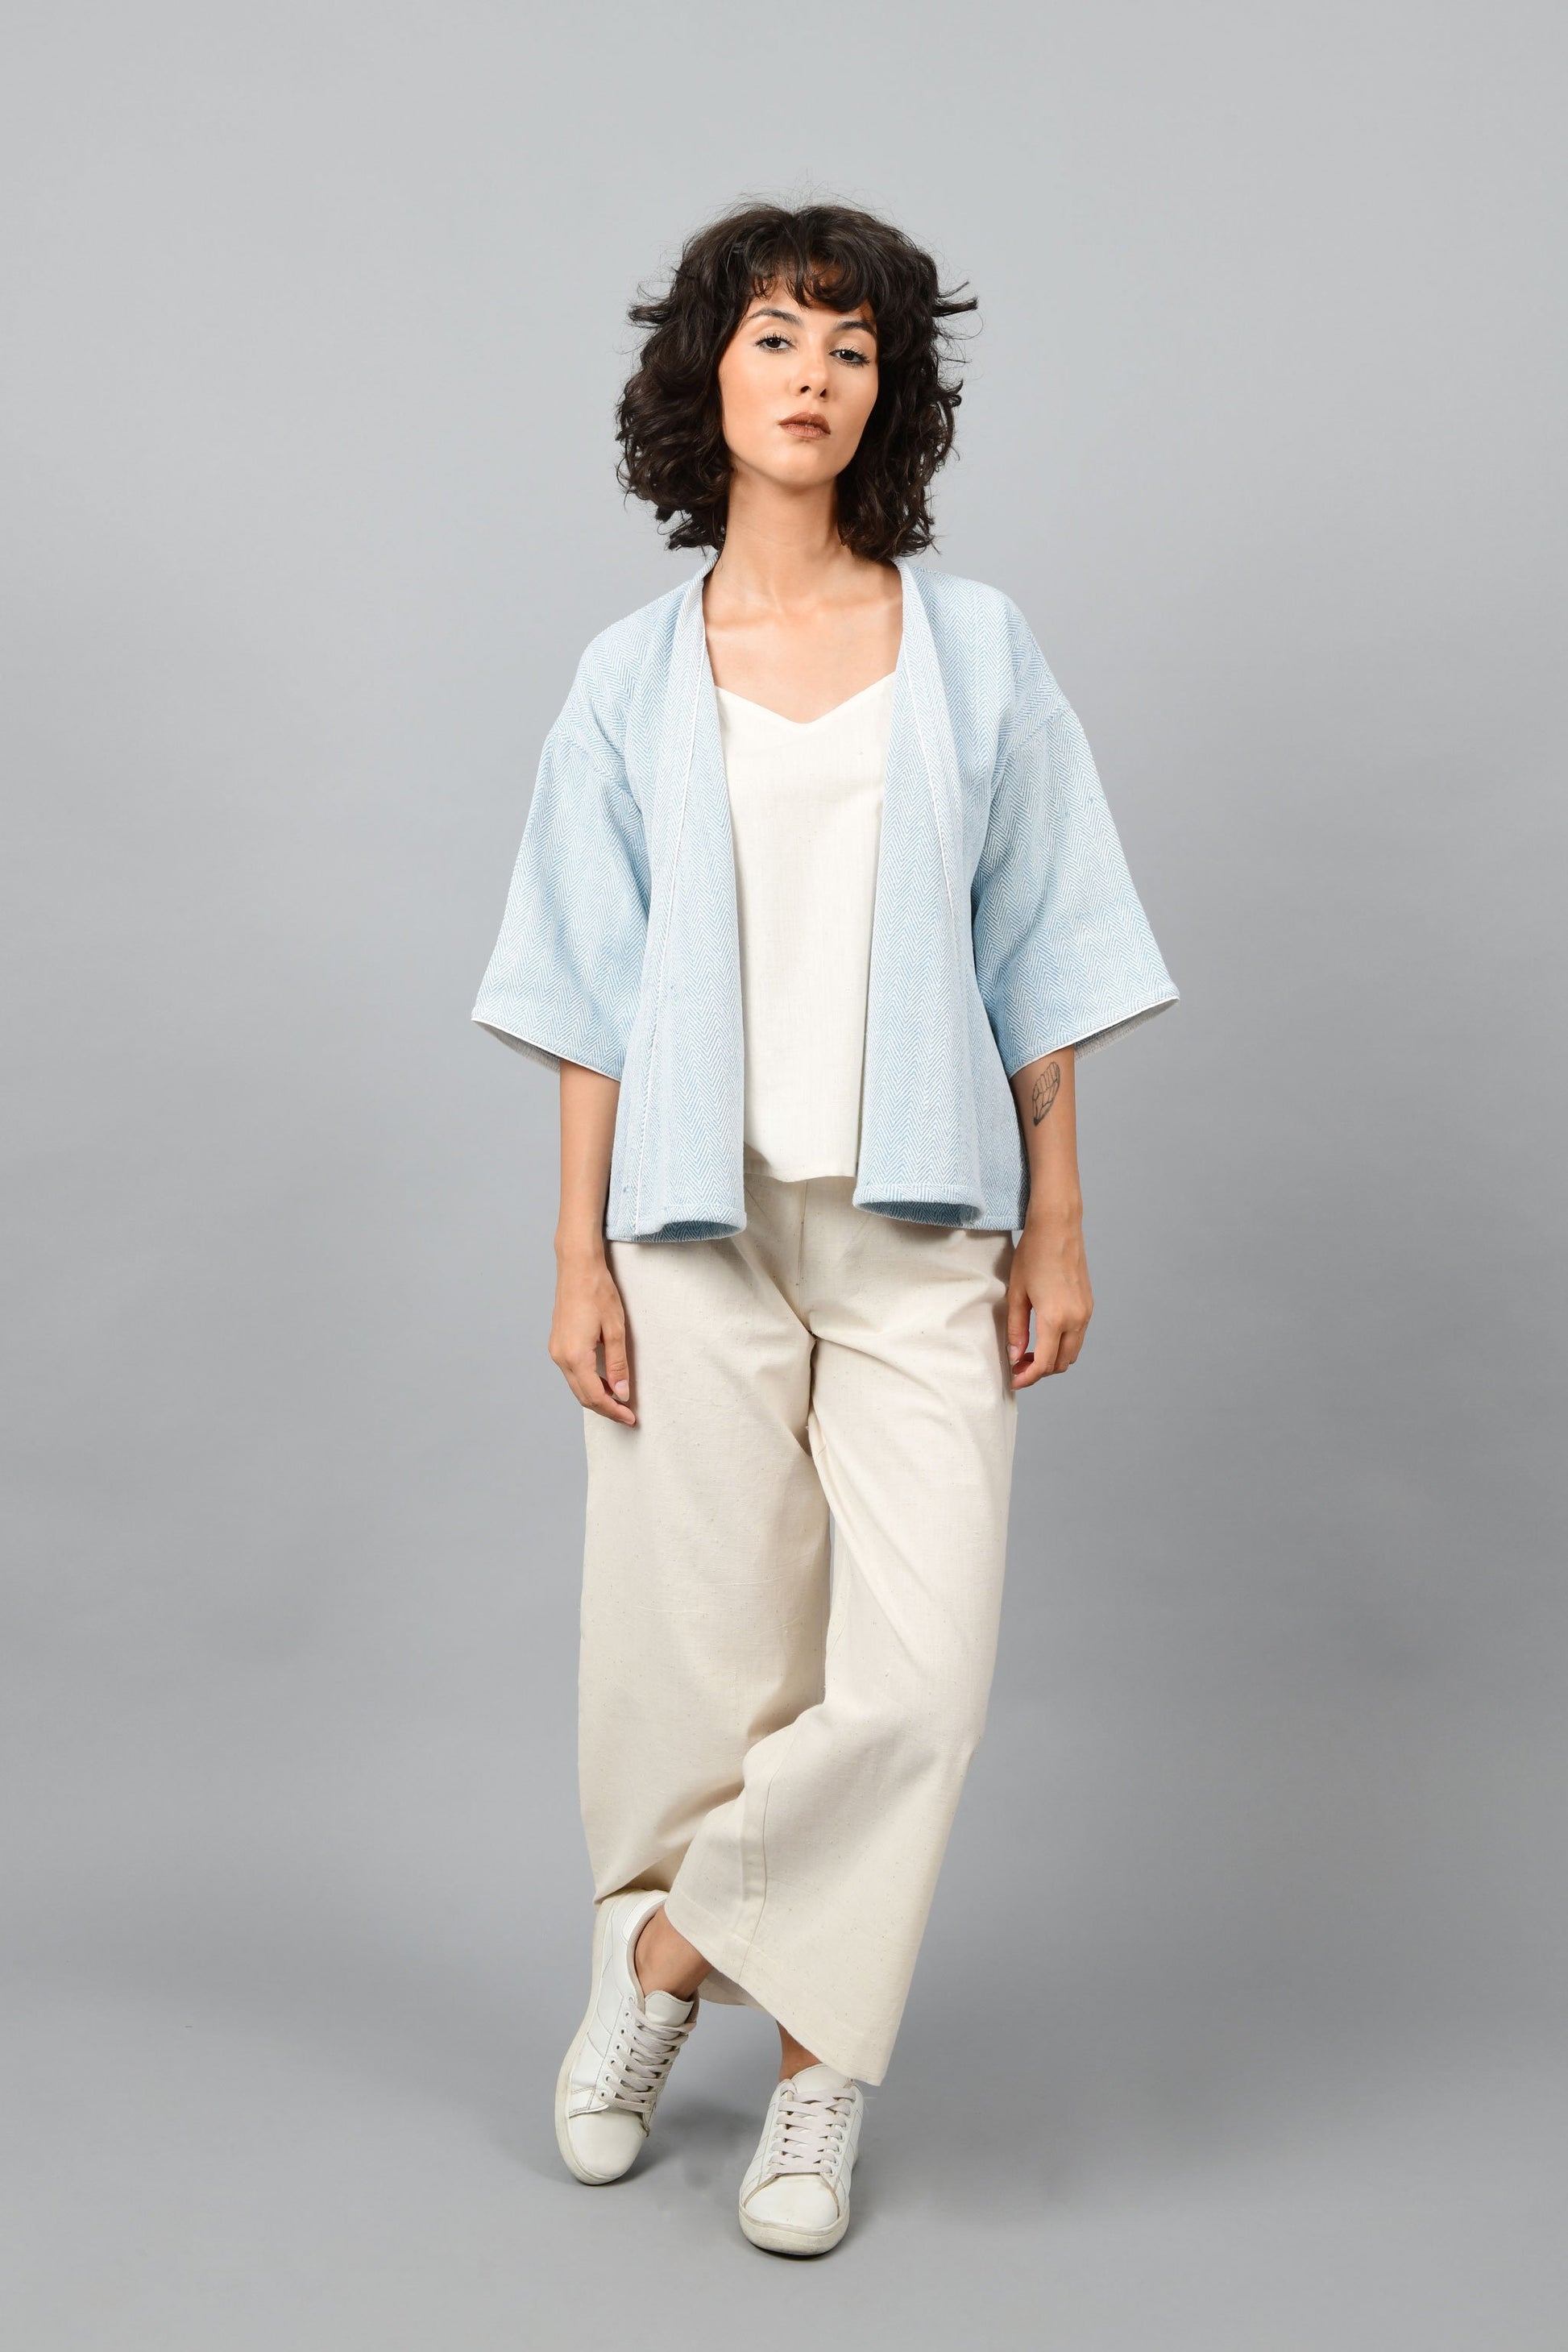 Model wearing anti-fit short blue shrug made in pointed twill with handspun and handwoven khadi cotton. Paired with off-white spaghetti, palazzos and white shoes.